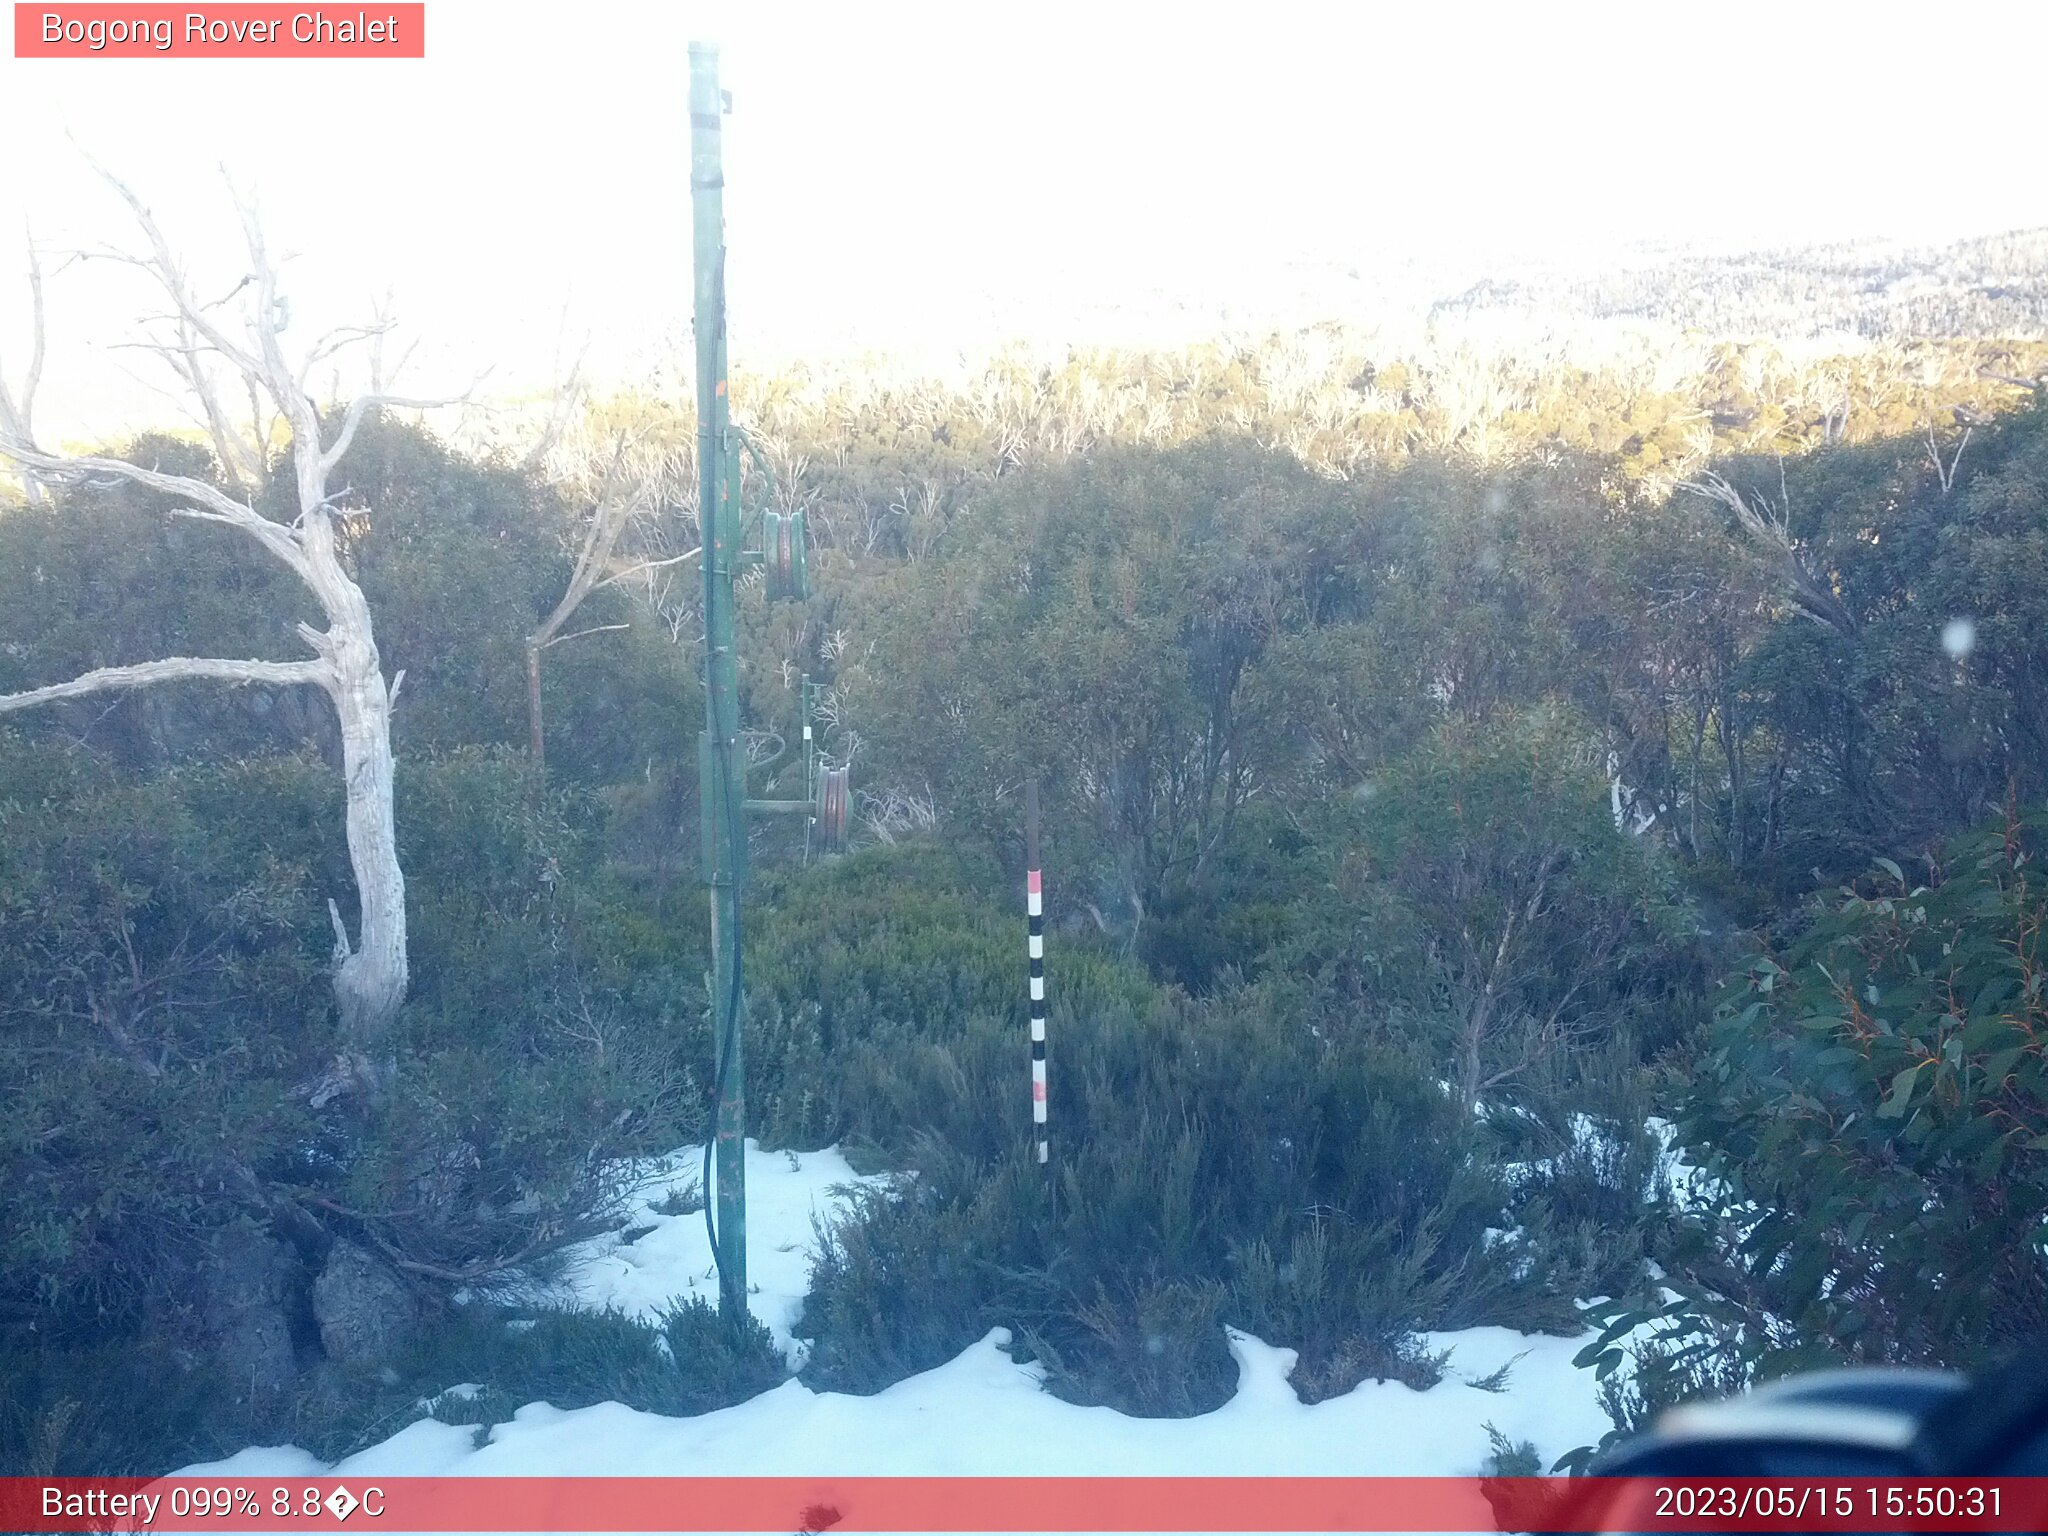 Bogong Web Cam 3:50pm Monday 15th of May 2023